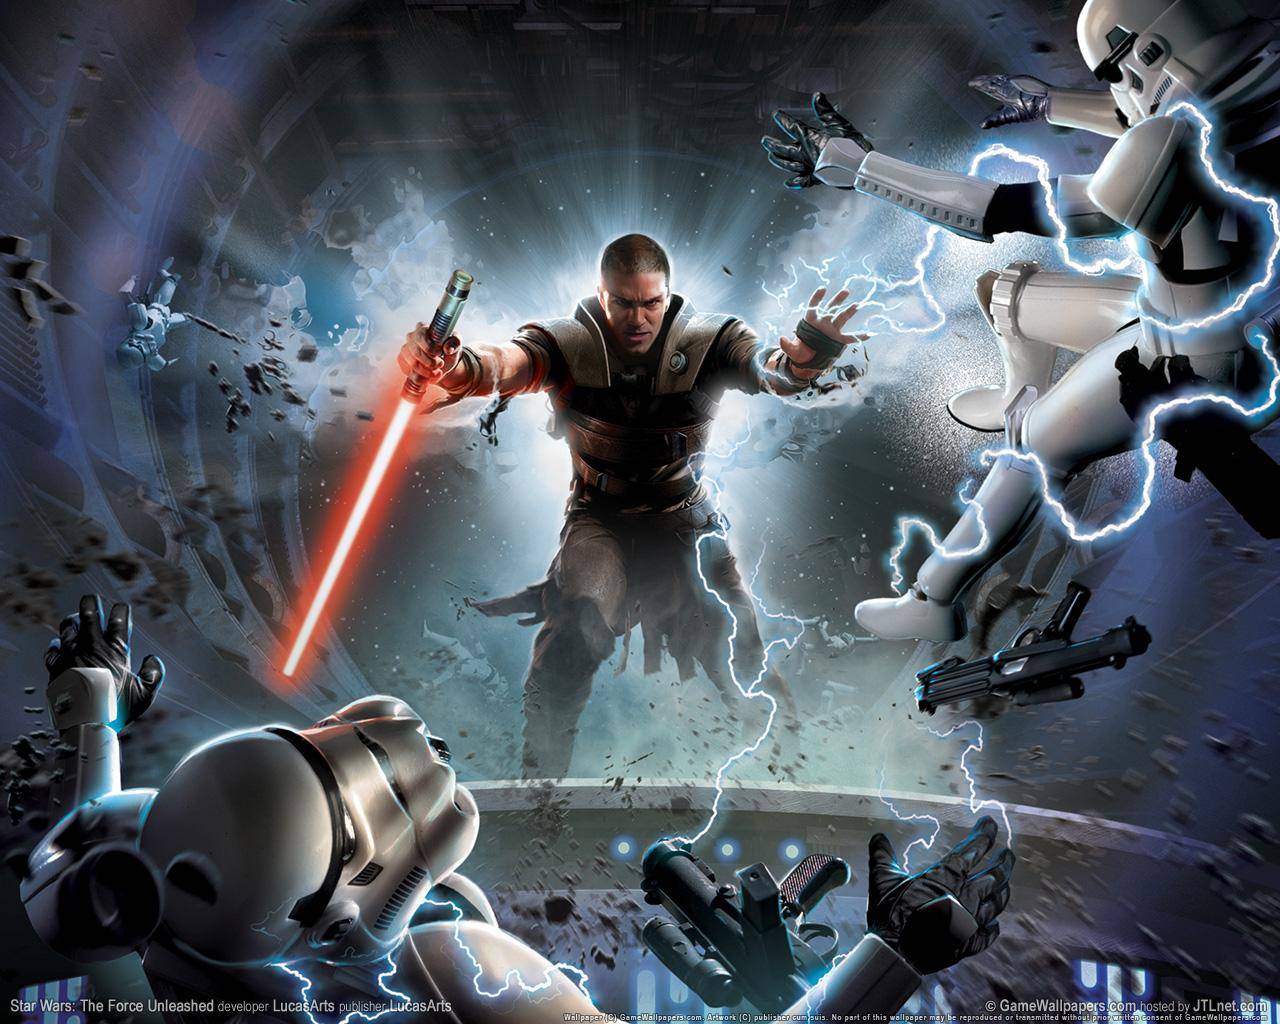 148241_wallpaper_star_wars_the_force_unleashed_03_1280_1